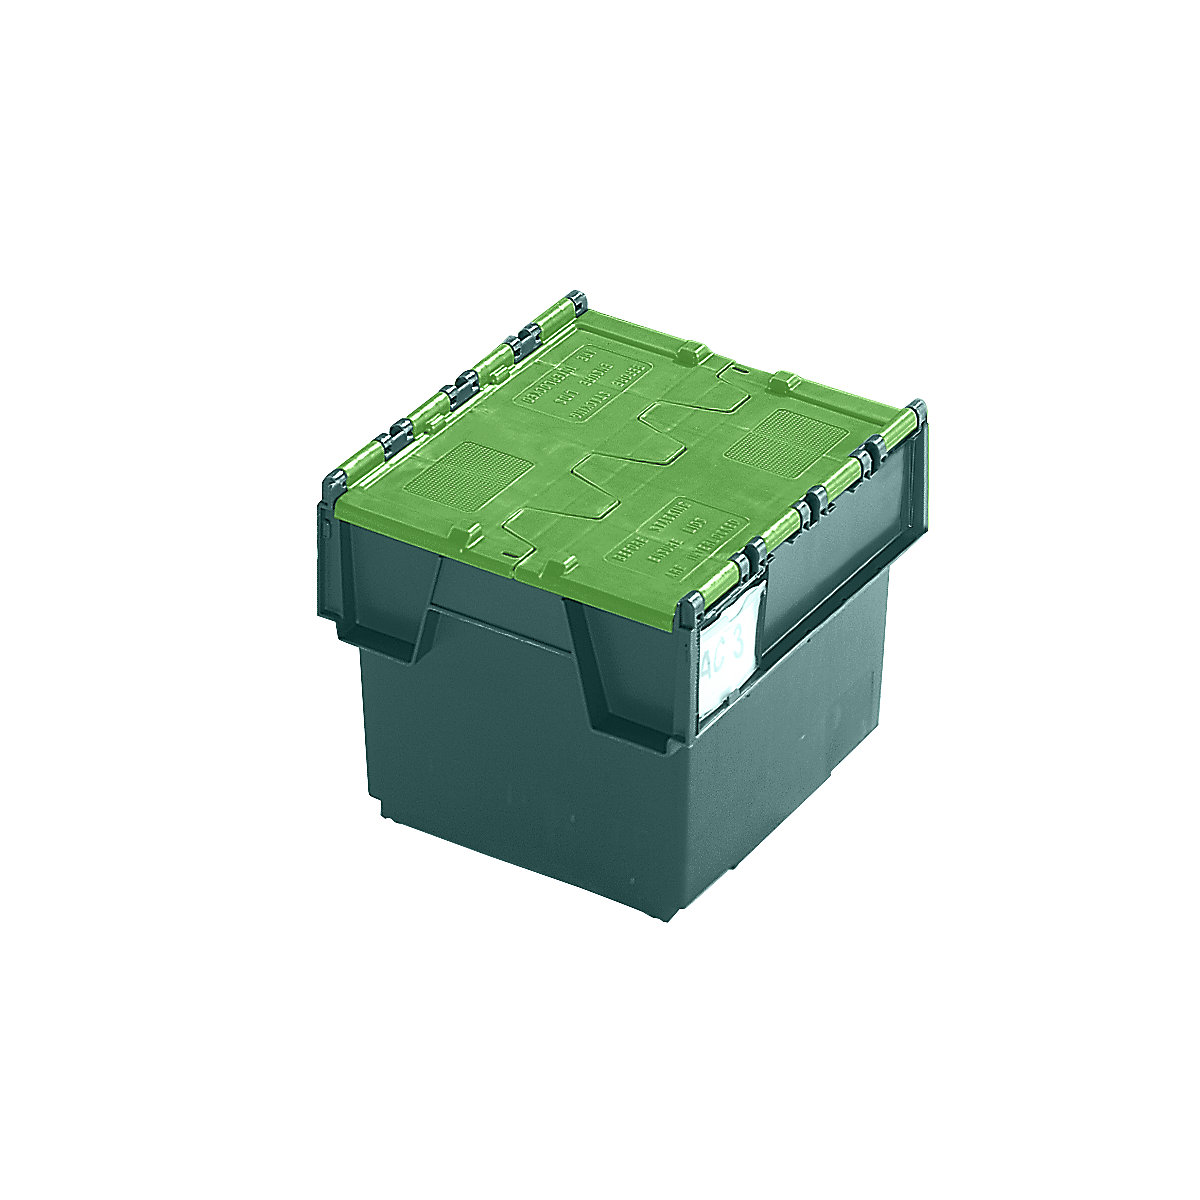 KAIMAN reusable stacking container, capacity 20 litres, LxWxH 400 x 300 x 252 mm, green